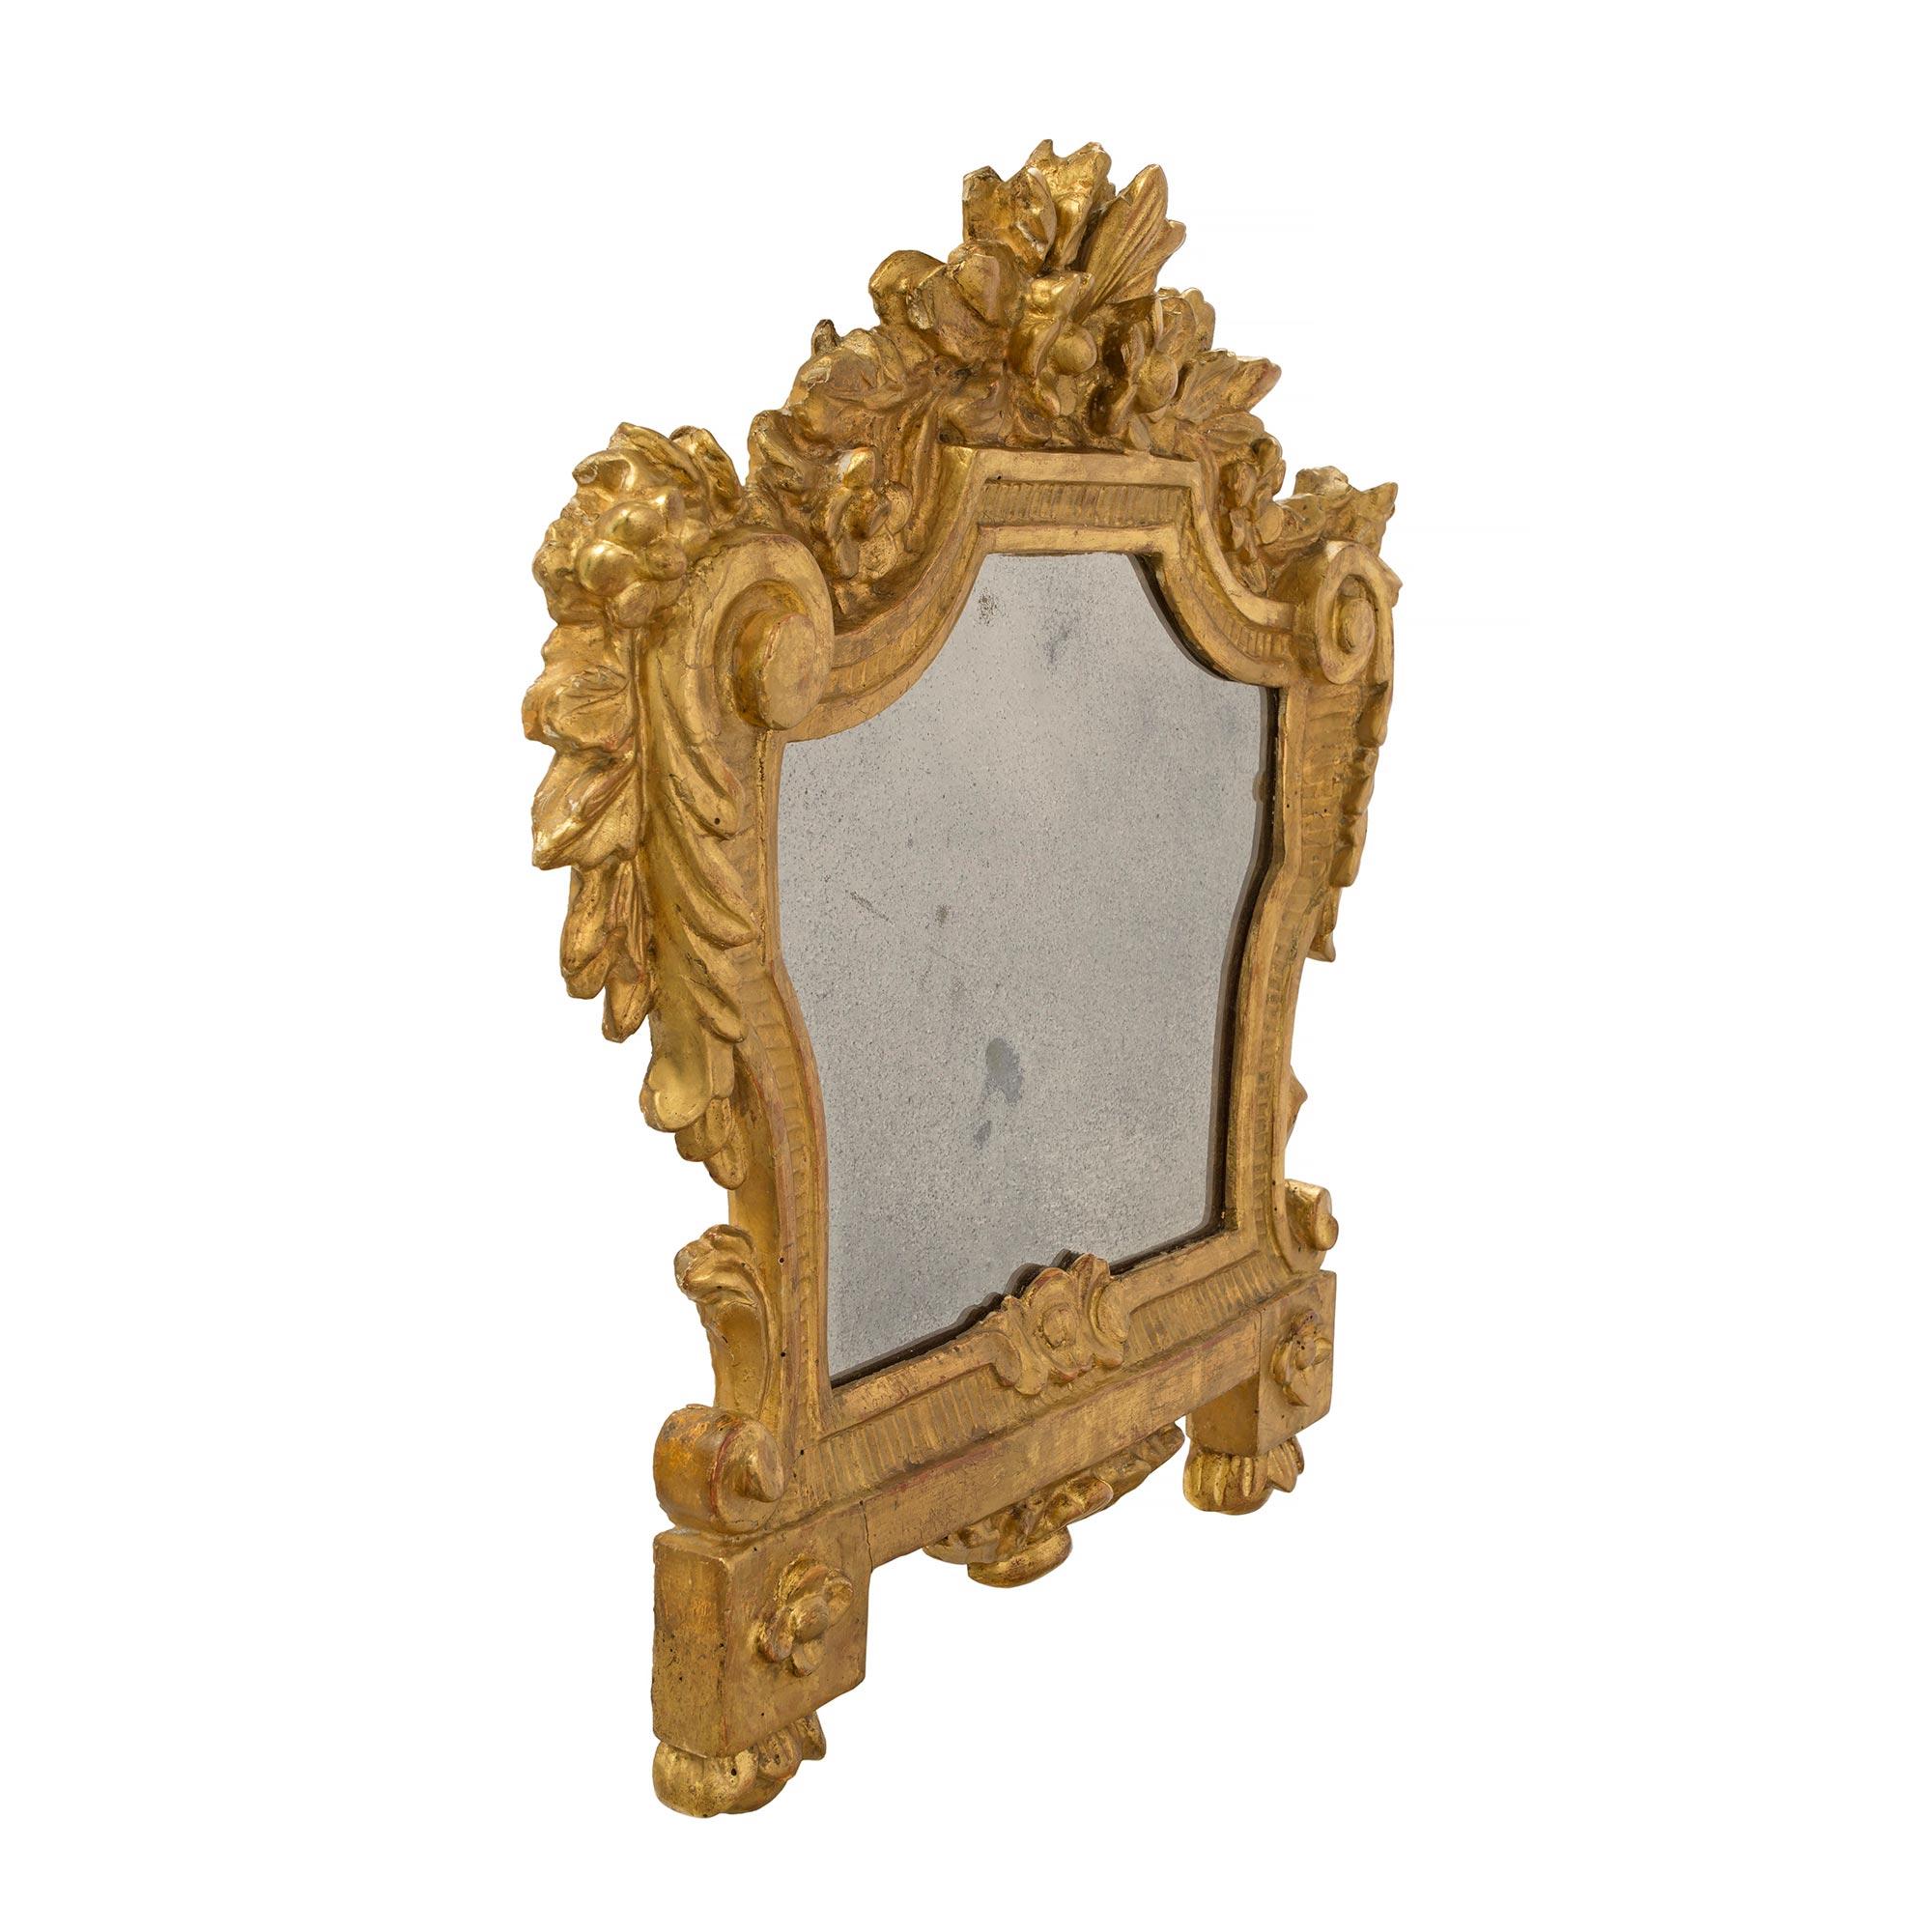 A charming and complete set of three Italian 18th century Louis XV period giltwood mirrors. The mirrors are raised by protruding block supports with detailed rosettes and foliate designs. Each mirror plate is bordered by reeded foliate designs and S